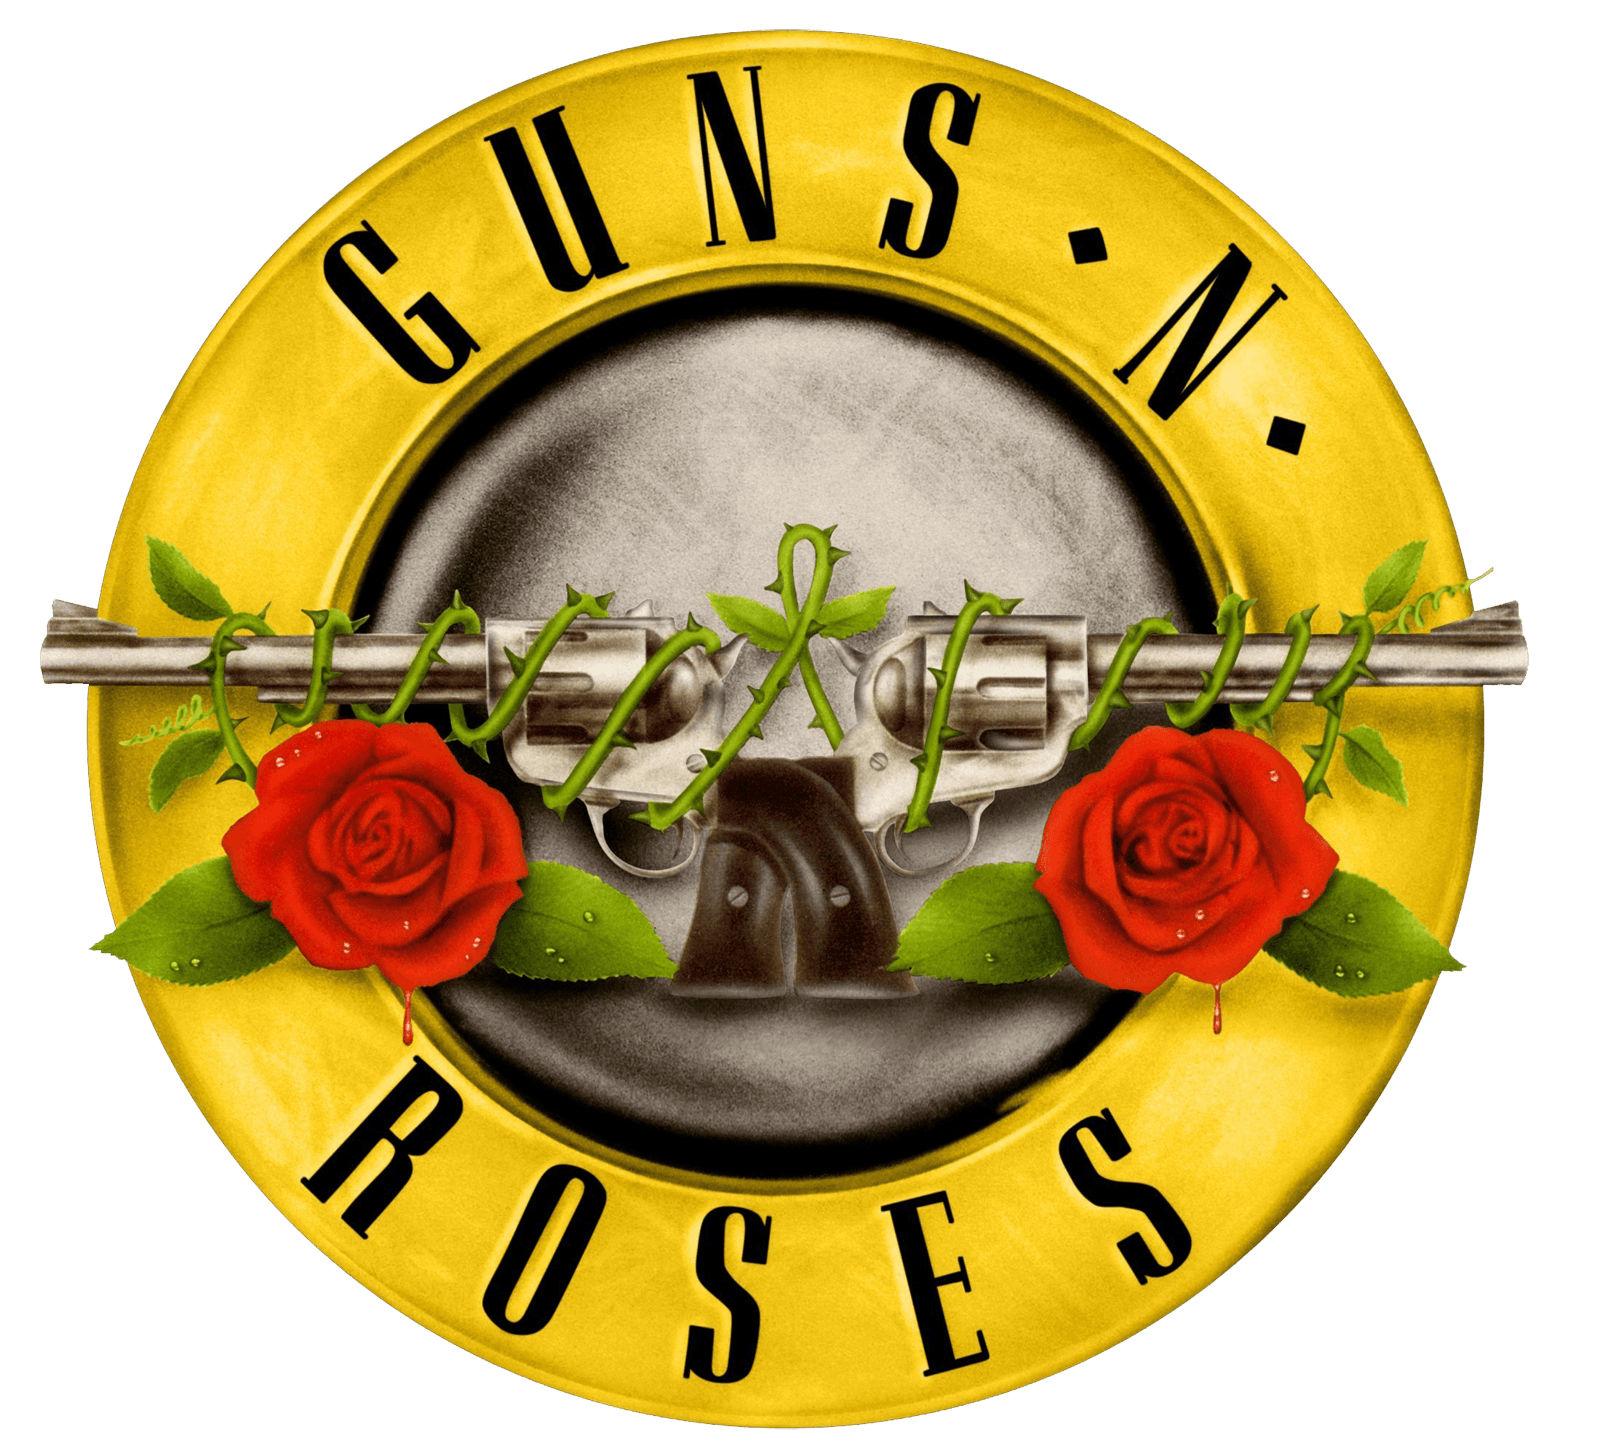 Guns and Roses Logo - Guns N'Roses Logo, Guns N'Roses Symbol Meaning, History and Evolution